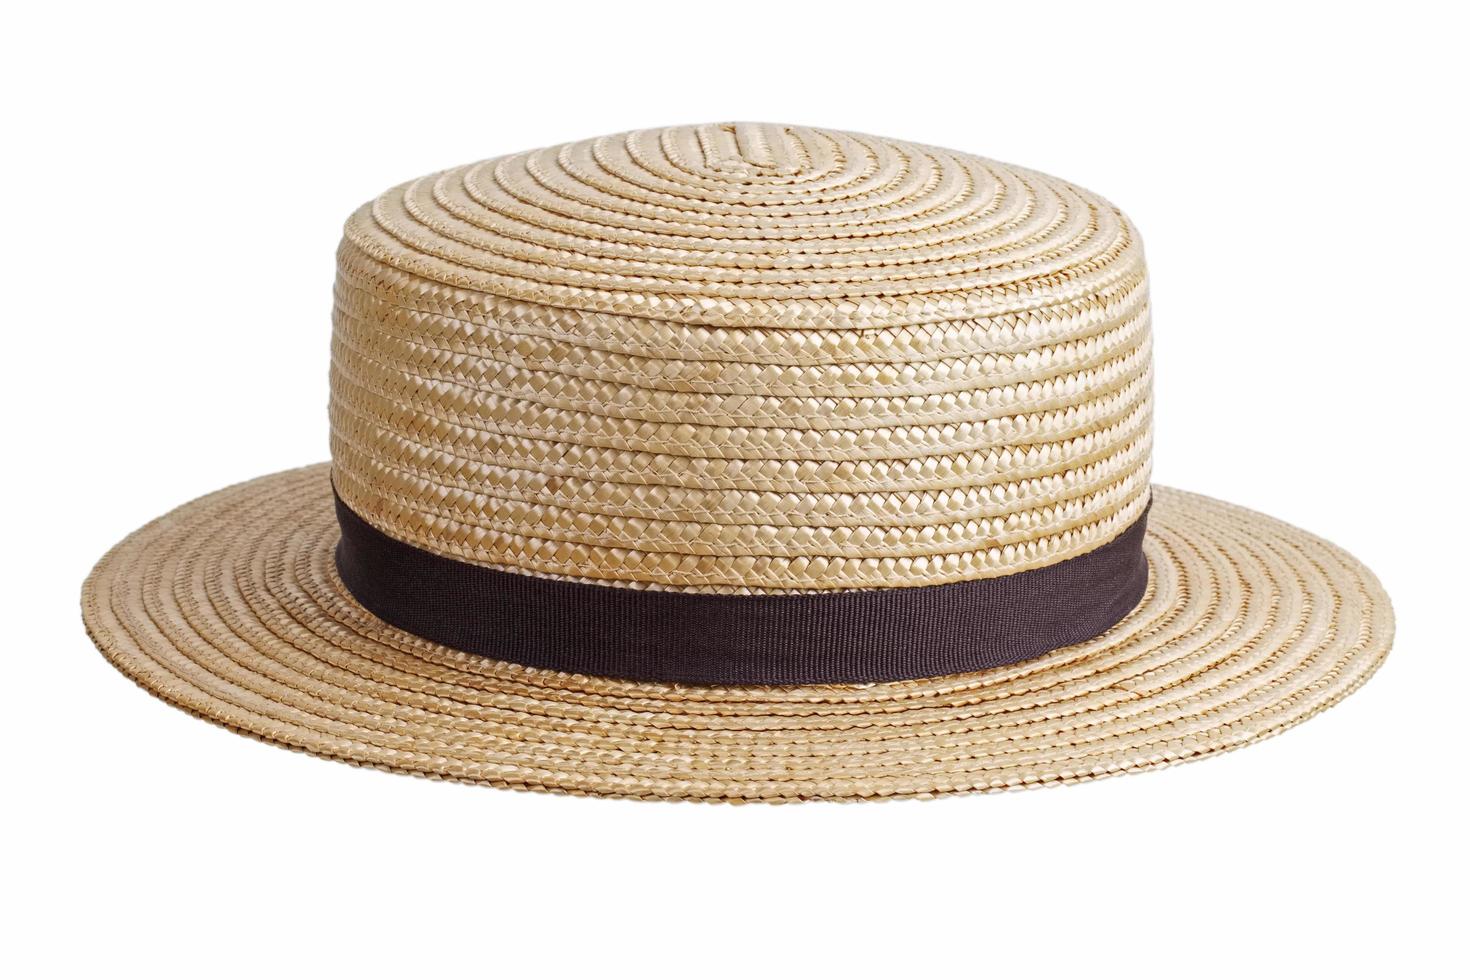 Straw hat on a white background photo